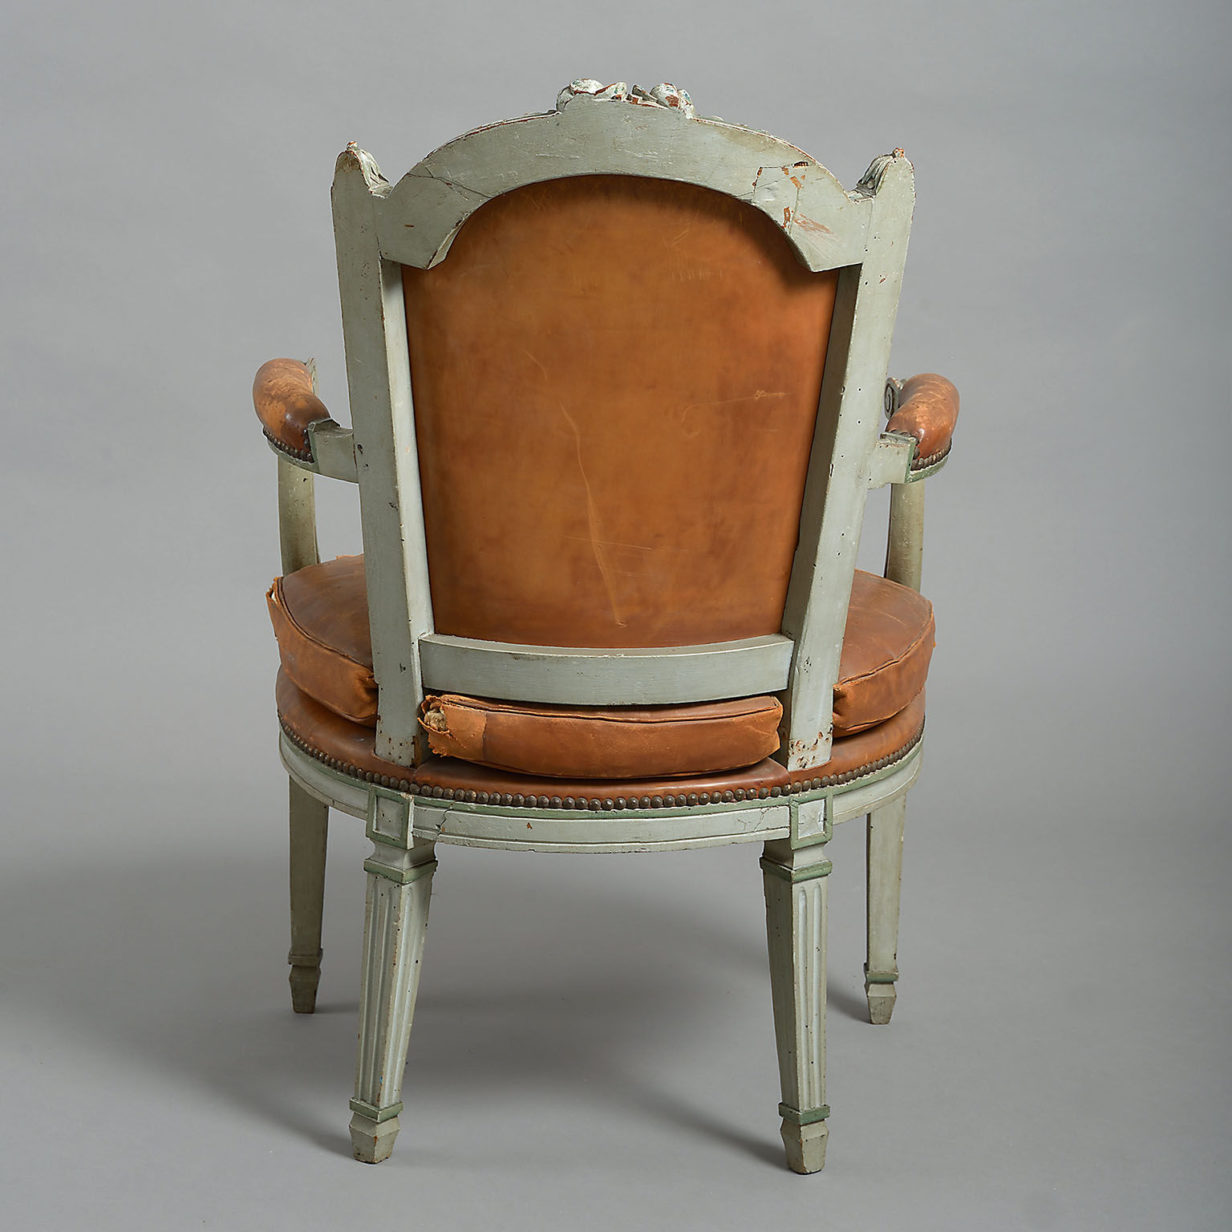 One of Three Pairs of Louis XVI Painted Armchairs